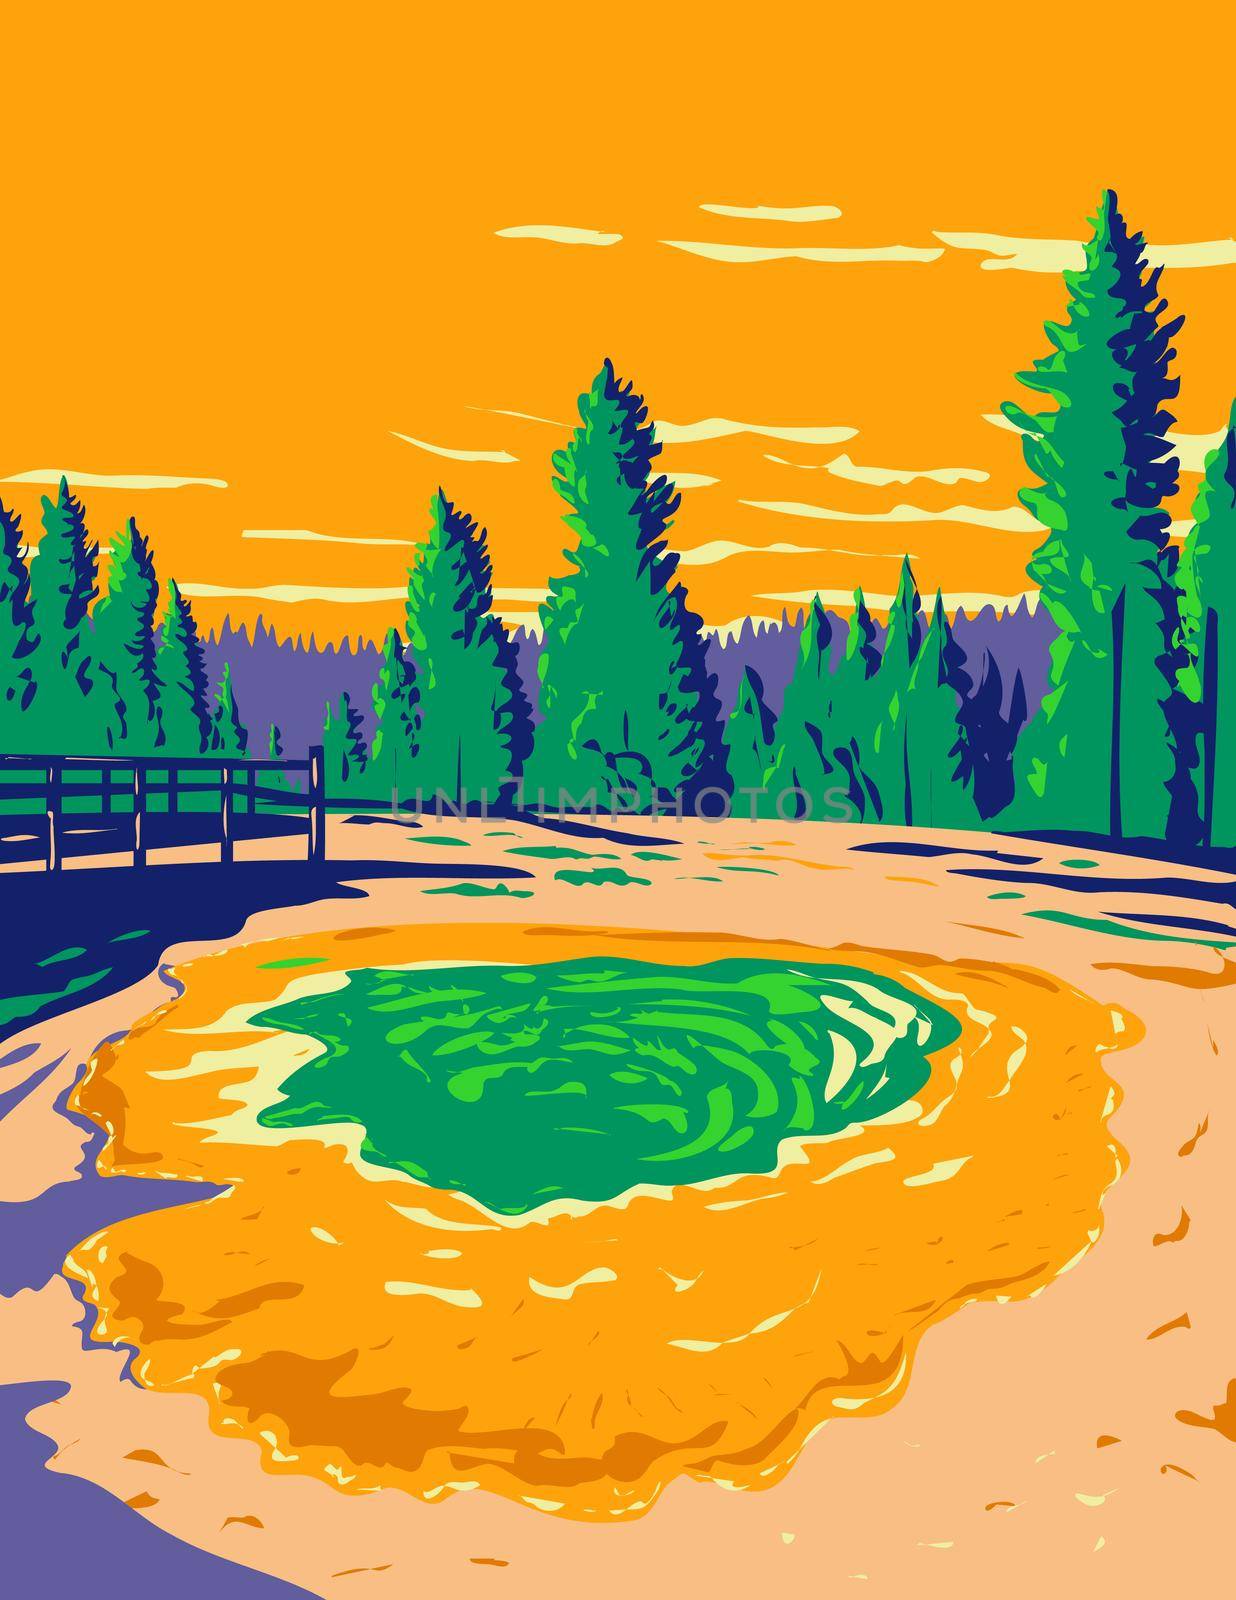 WPA poster art of Morning Glory Pool a hot spring in the Yellowstone Upper Geyser Basin located in Yellowstone National Park, Teton County, Wyoming USA done in works project administration style.